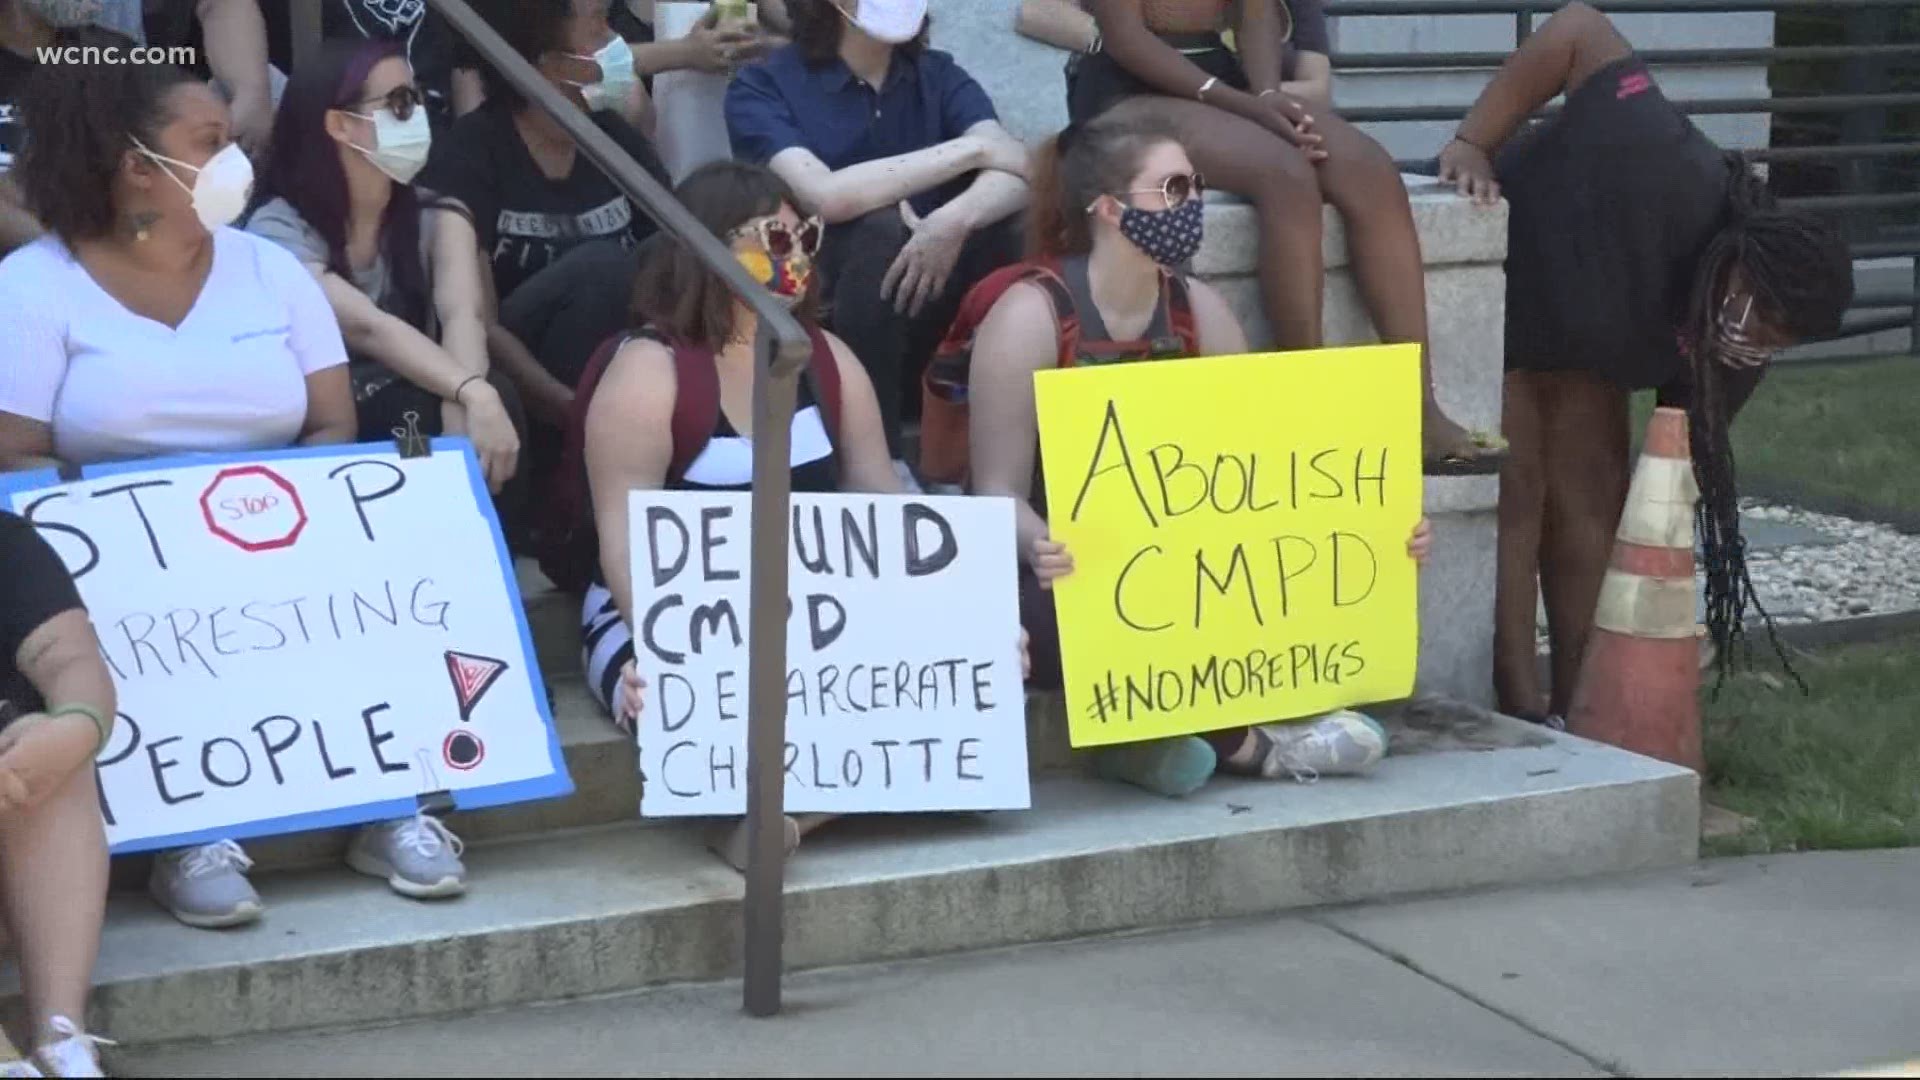 "Charlotte Uprising" held a 'speak-out' on the steps of the Mecklenburg County District Attorney's Office